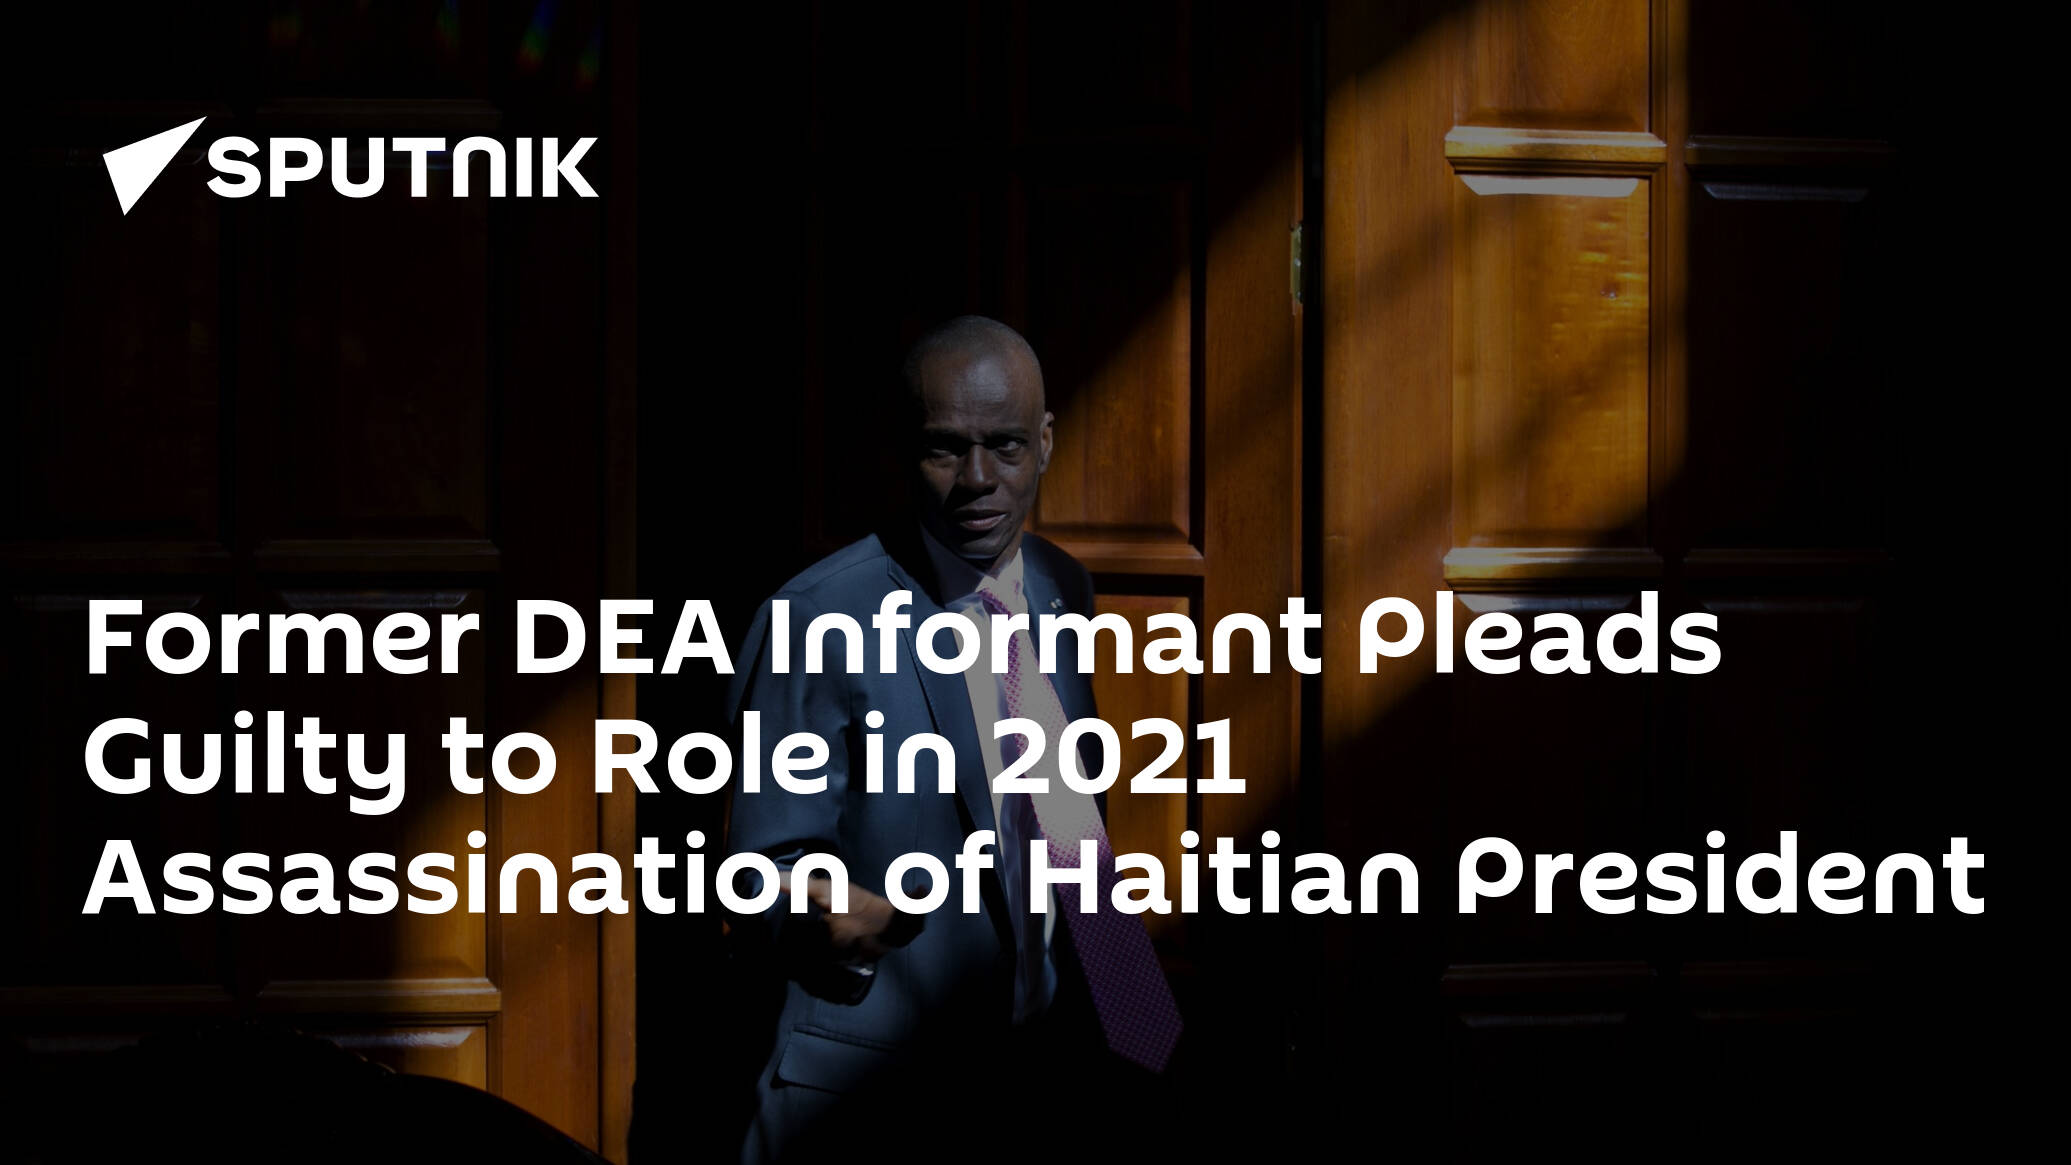 Former DEA Informant Pleads Guilty to Role in 2021 Assassination of Haitian President